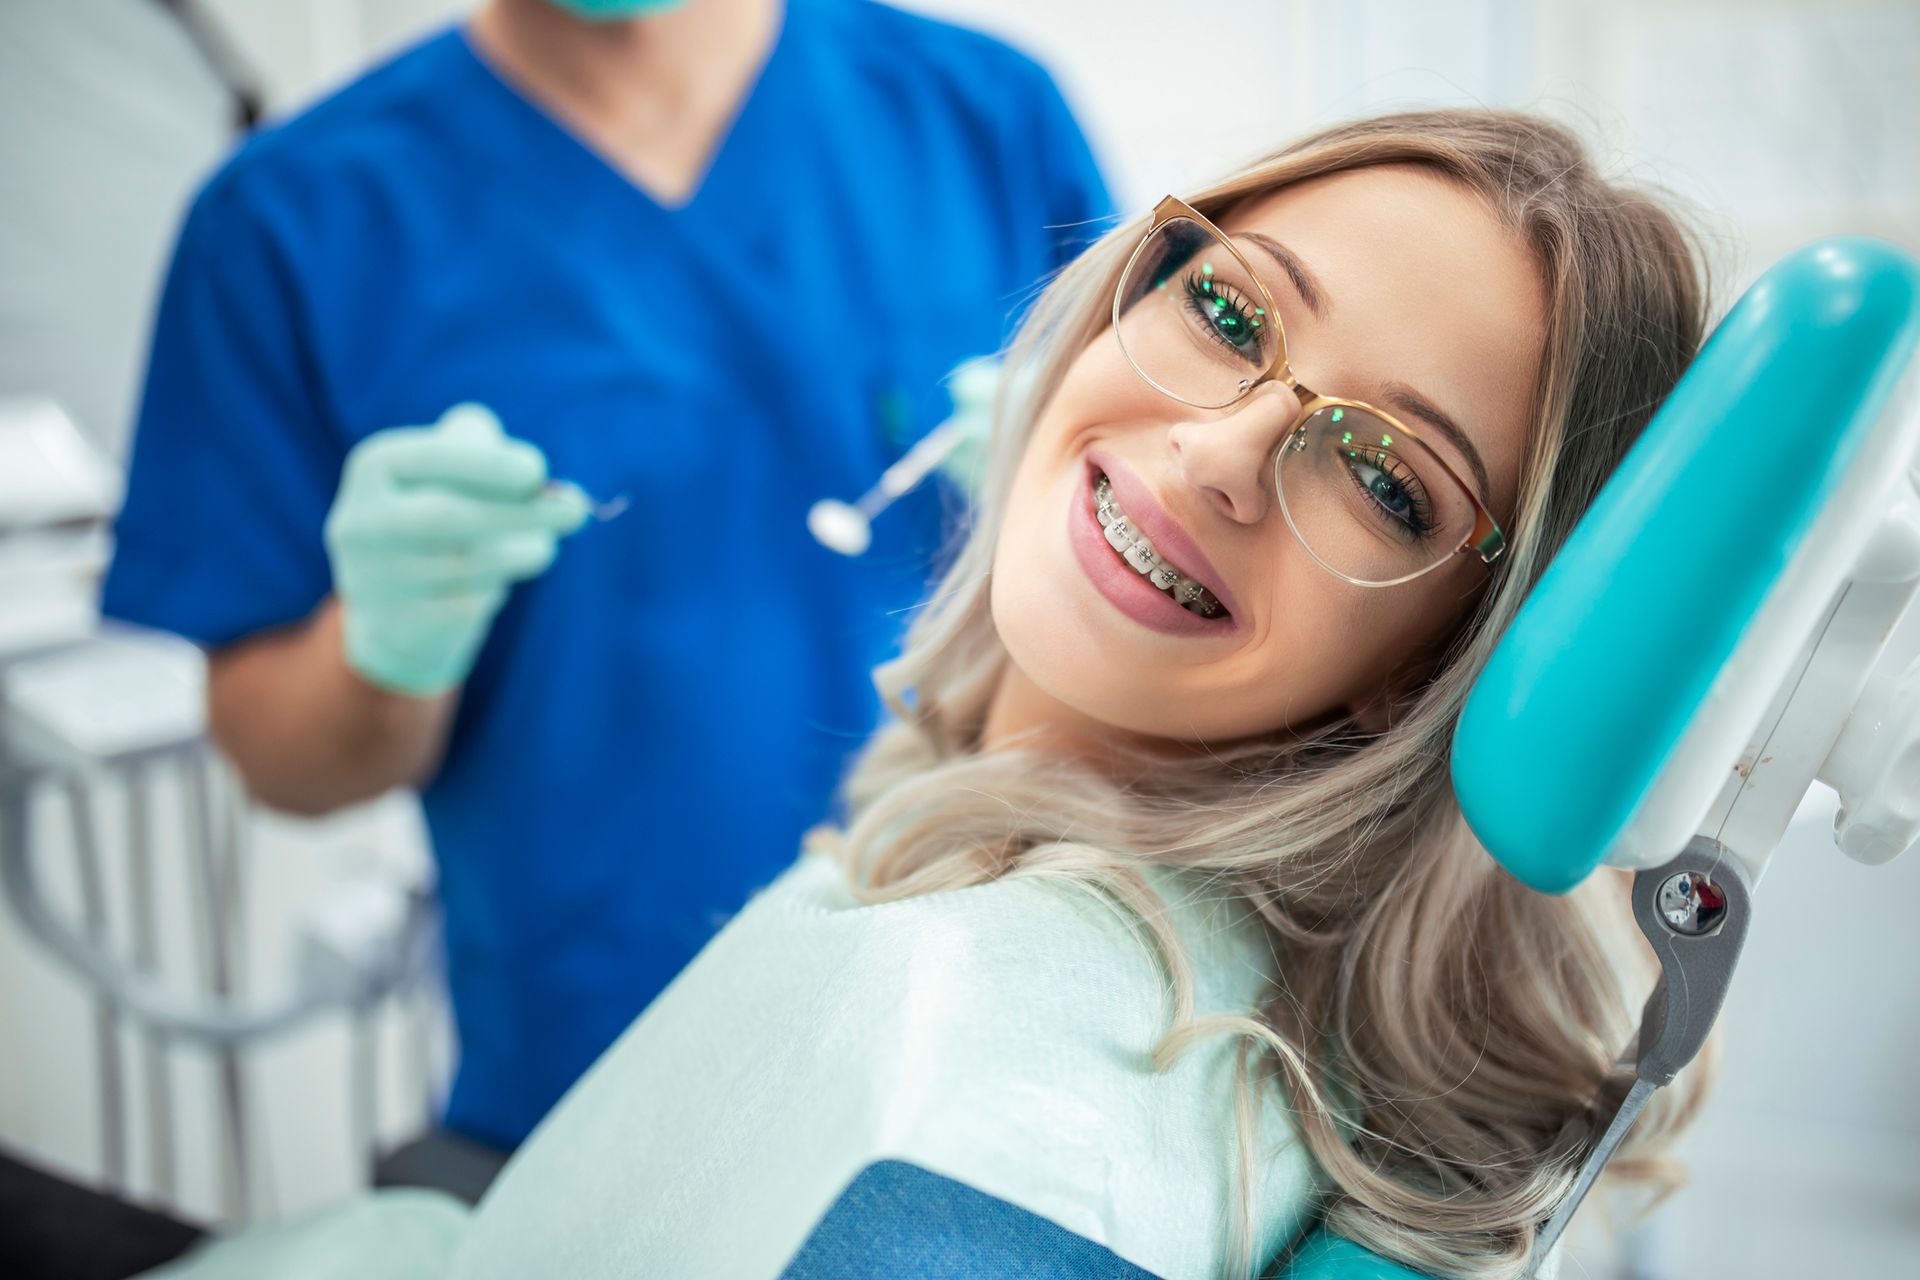 A woman with braces is smiling while sitting in a dental chair.